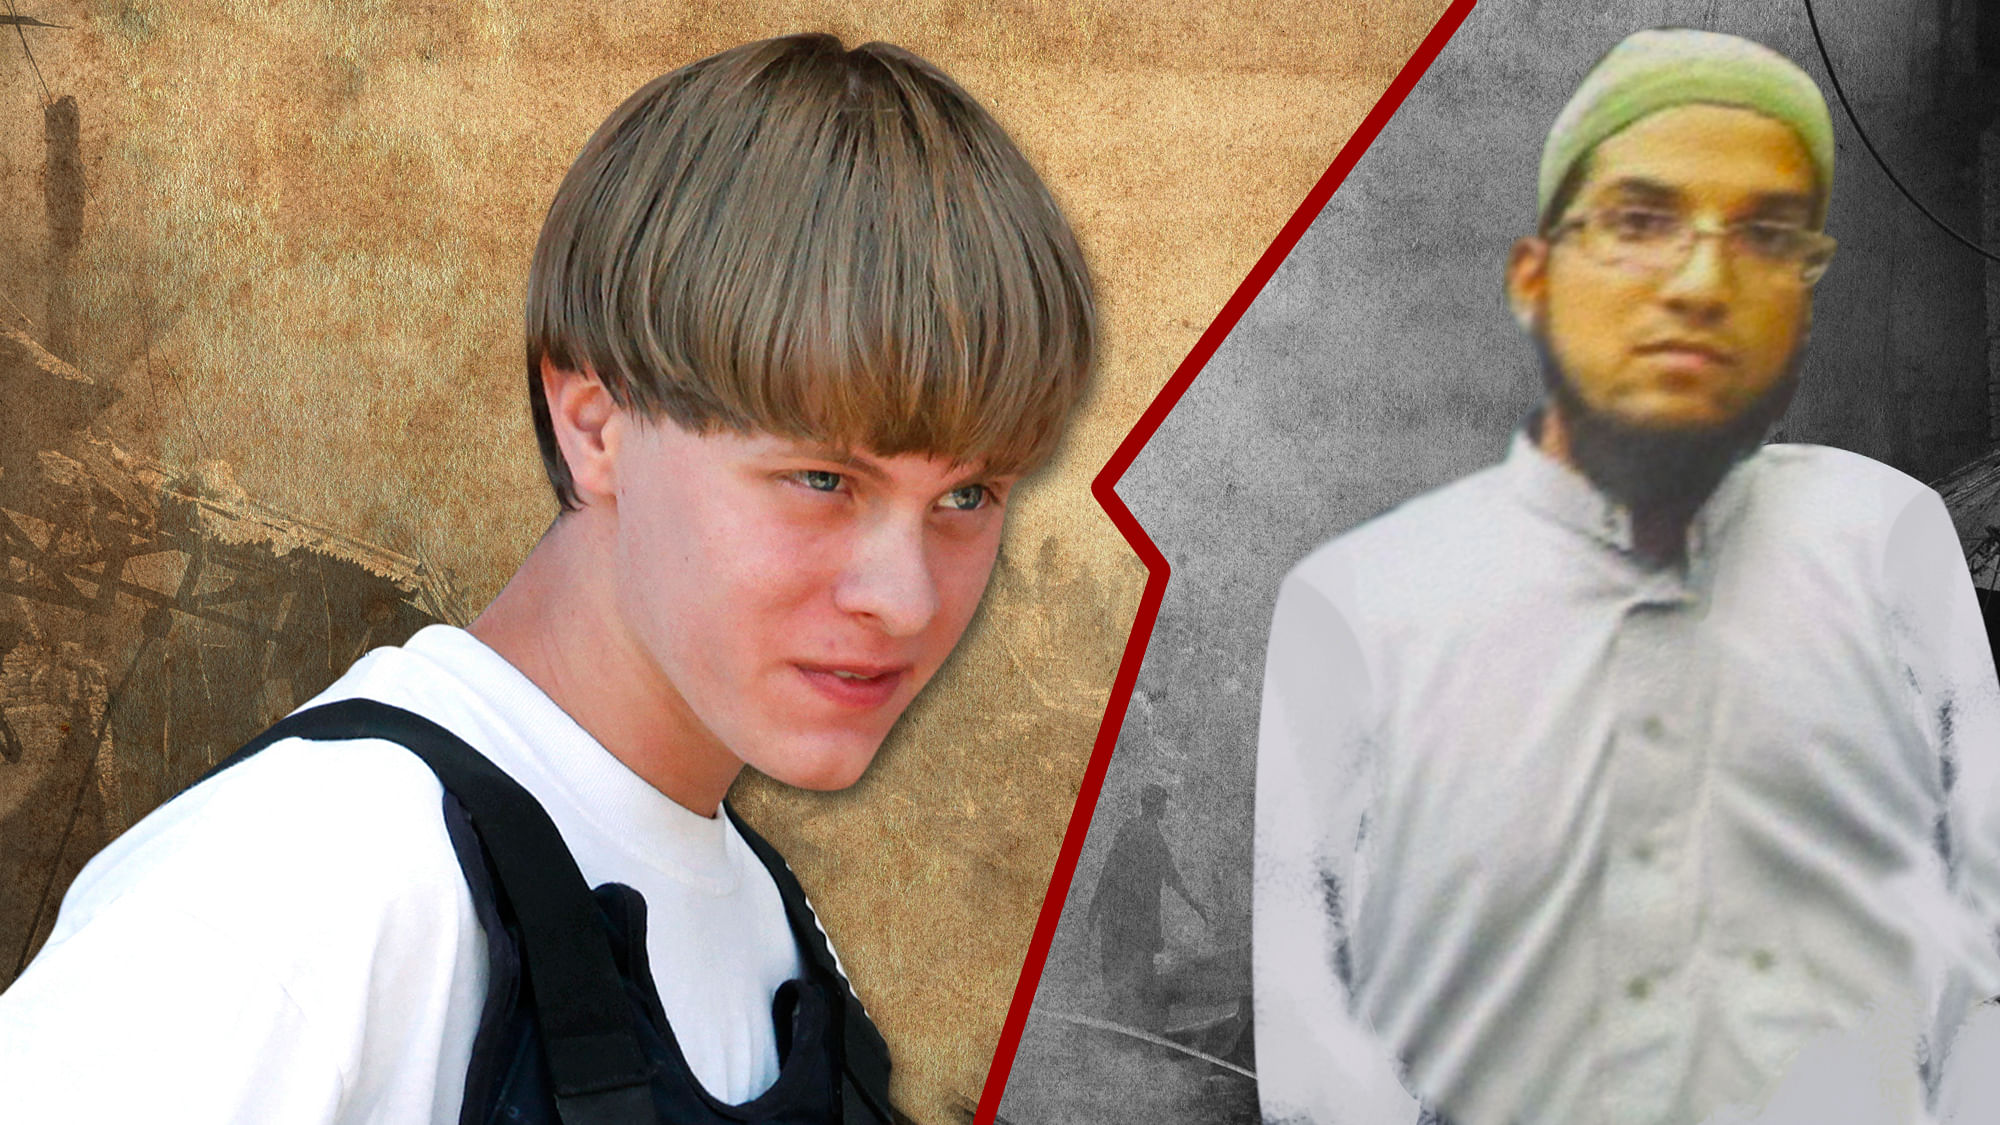 Dylann Roof (L) and Syed Rizwan Farook (R). (Photo: AP/This image has been altered by <b>The Quint</b>)